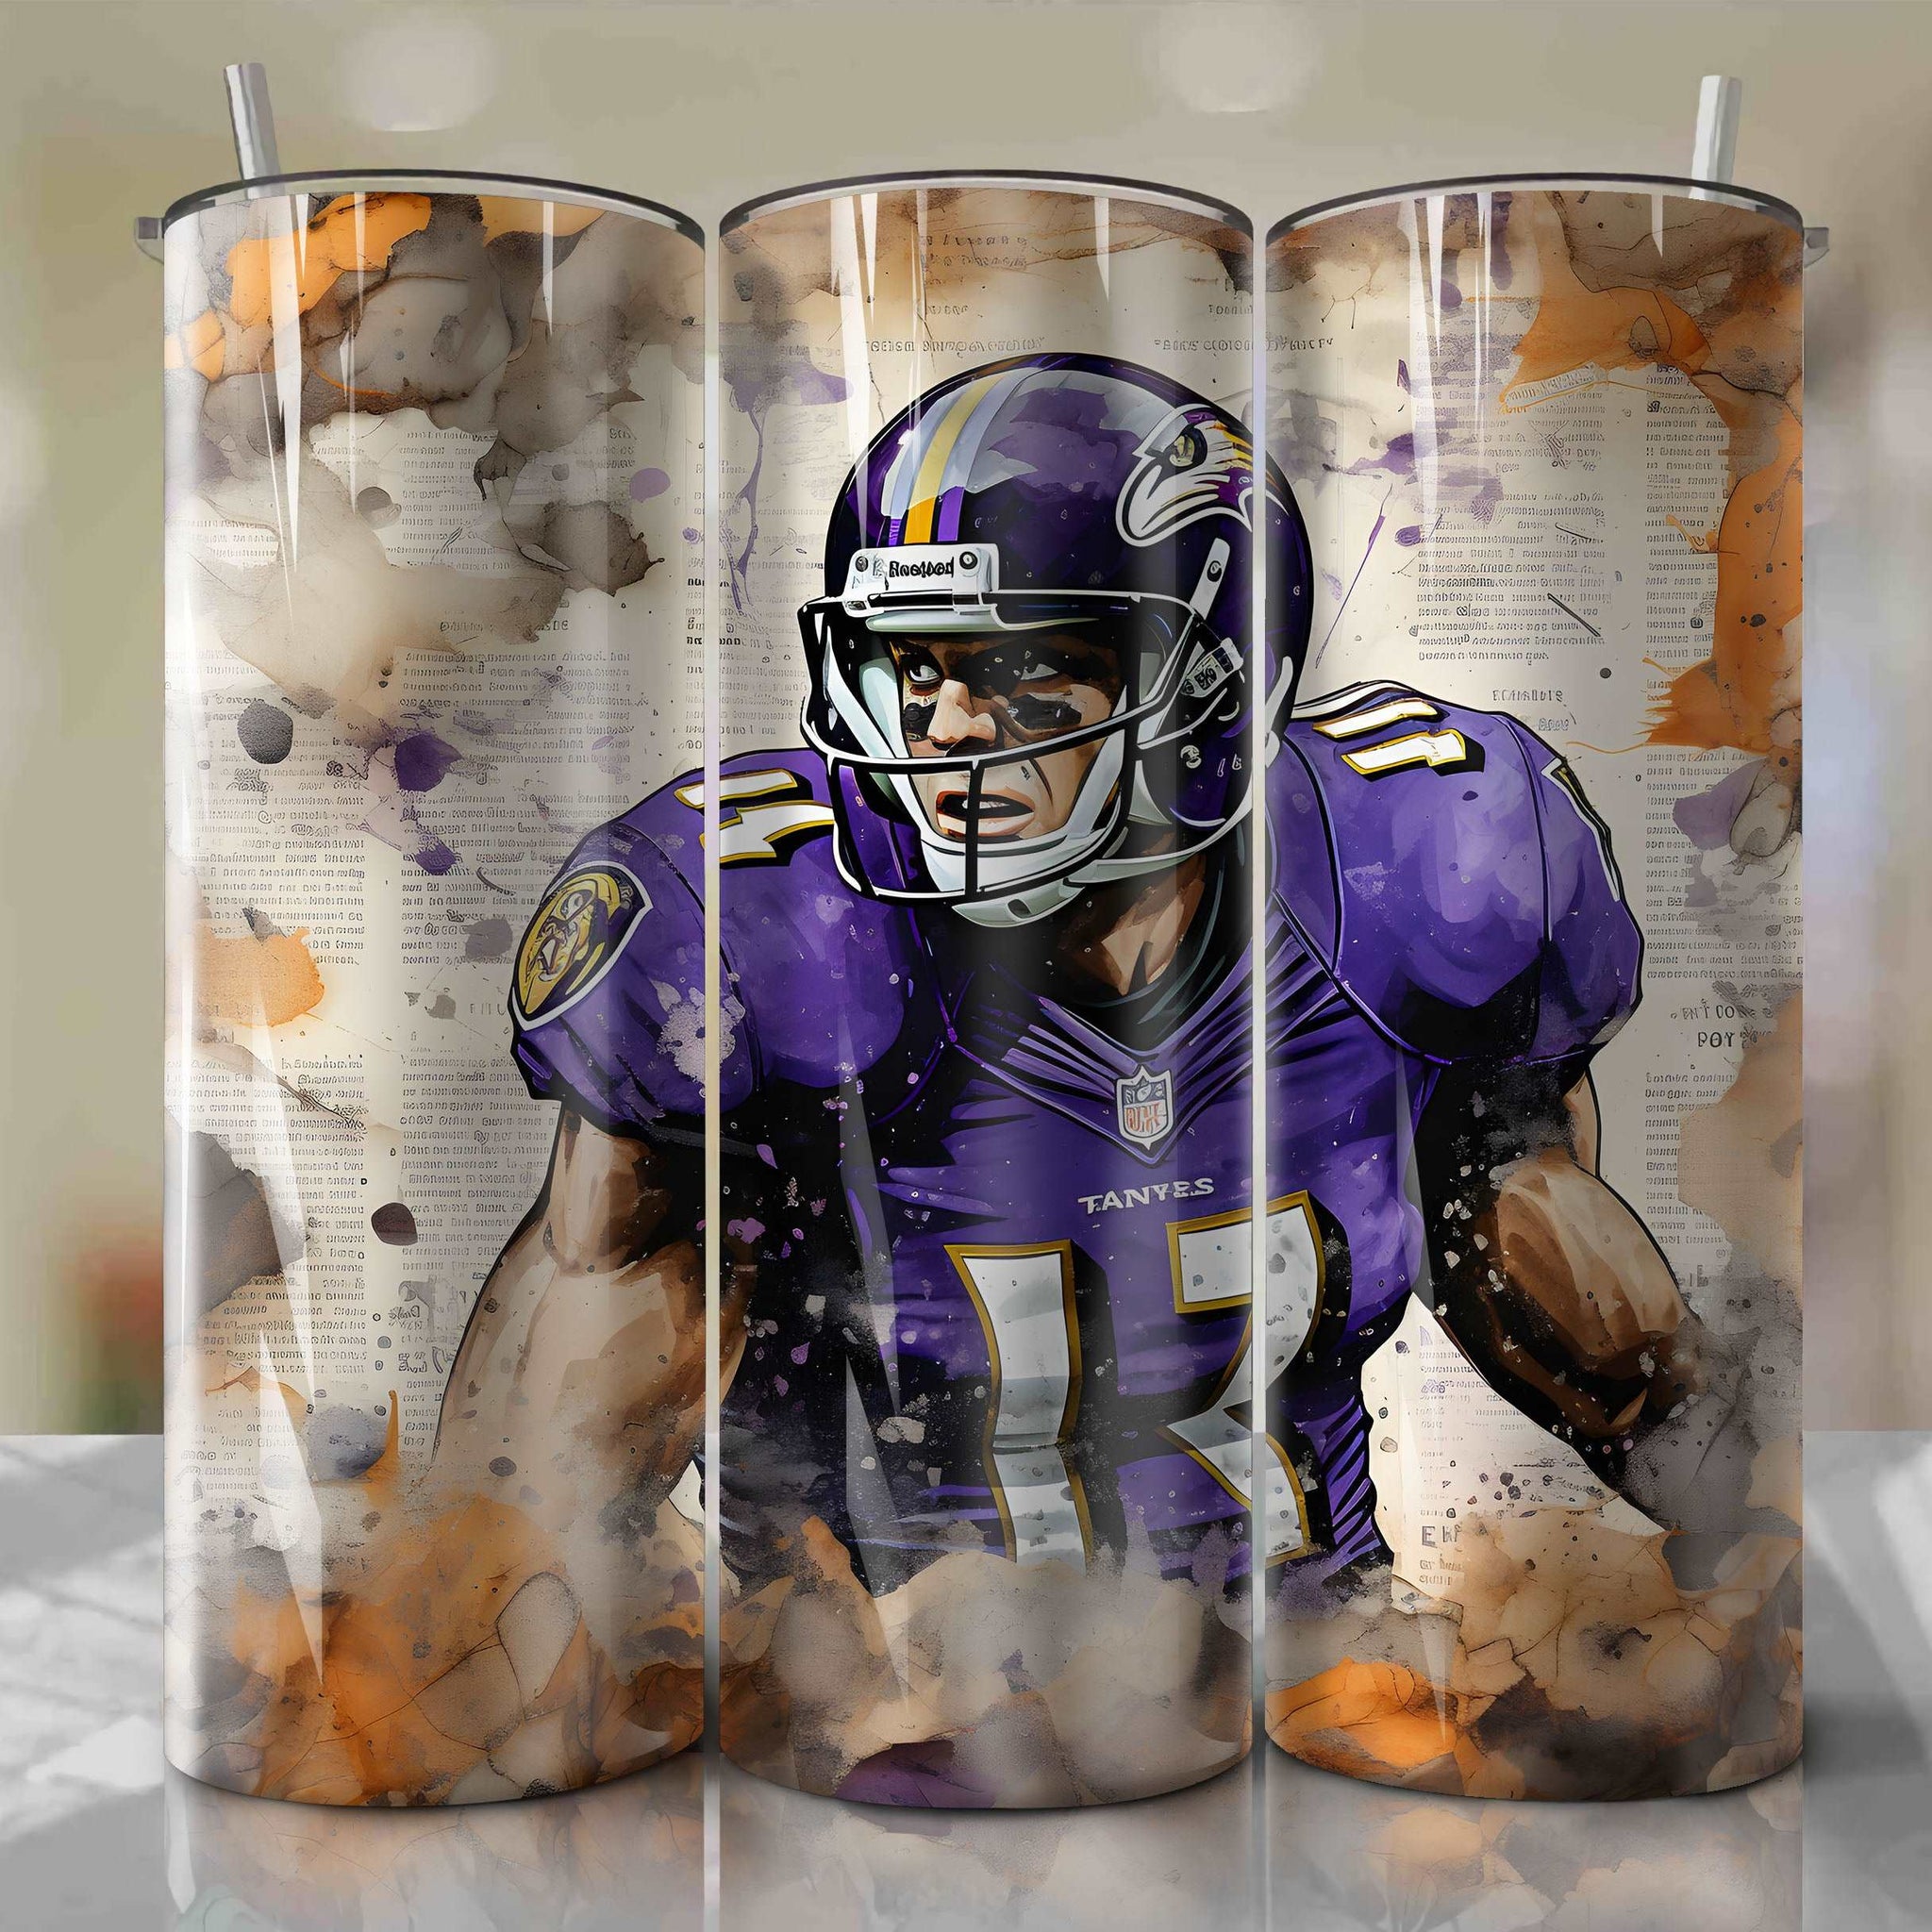 Detroit Lions Graphics Thermos - Sports Unlimited